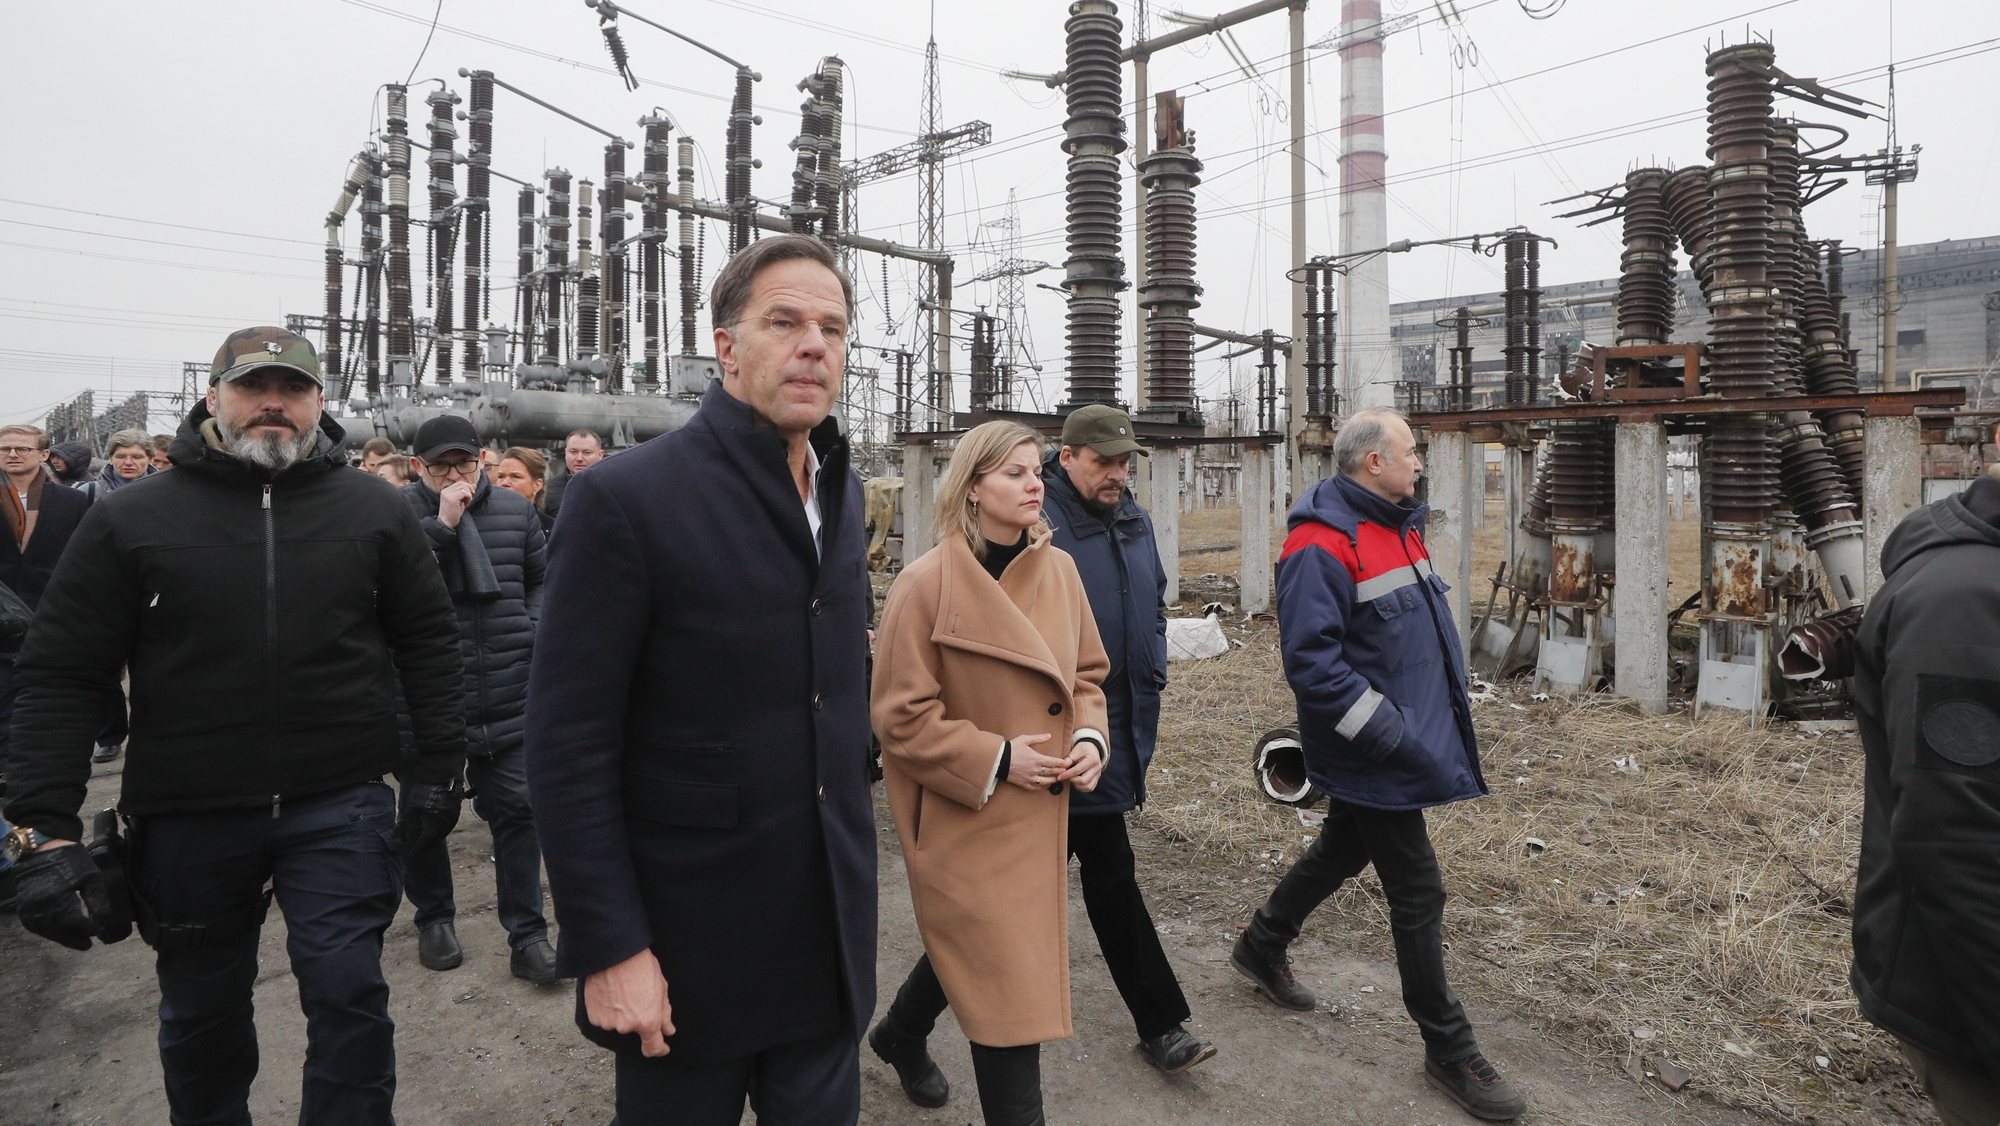 epa10473190 Dutch Prime Minister Mark Rutte (C) visits an energy facility reportedly damaged by Russian attack, near Kyiv, Ukraine, 17 February 2023. Rutte arrived in Ukraine to meet with top officials amid Russia&#039;s invasion.  EPA/SERGEY DOLZHENKO